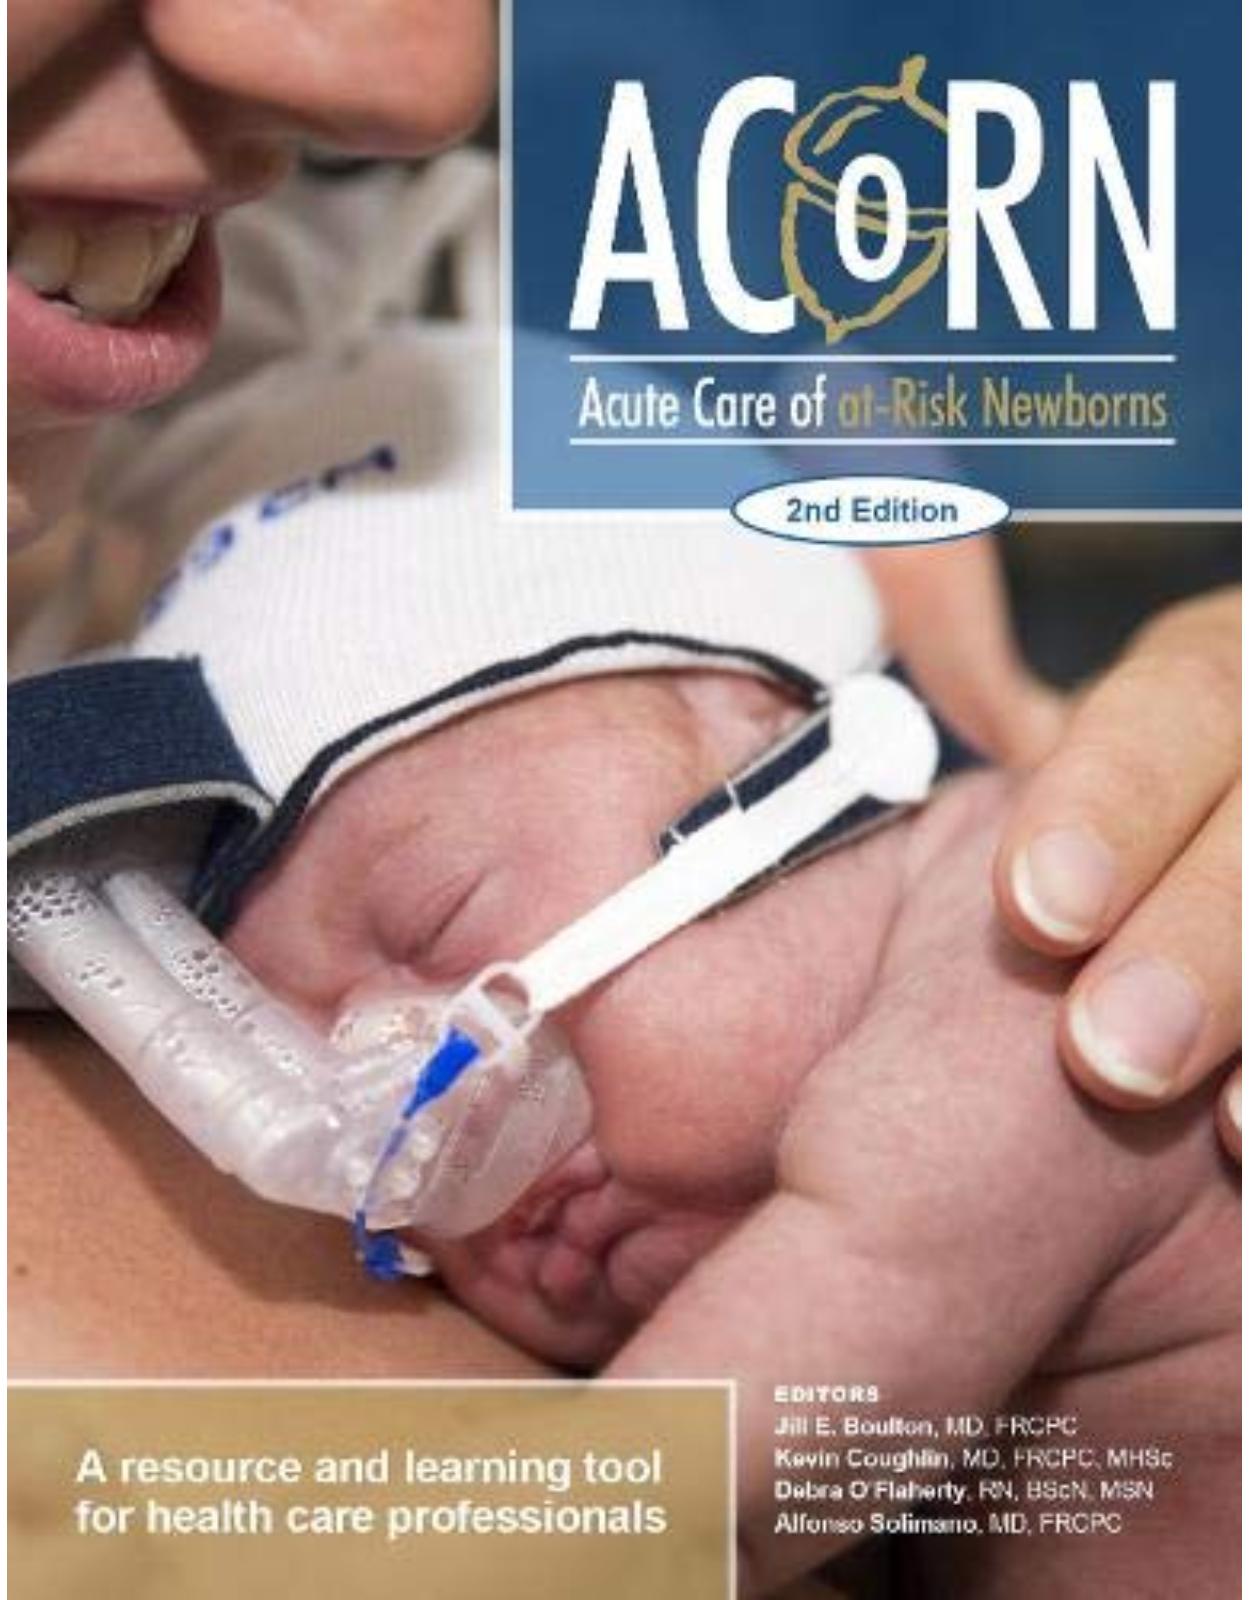 Acute Care of At-Risk Newborns: A Resource and Learning Tool for Health Care Professionals